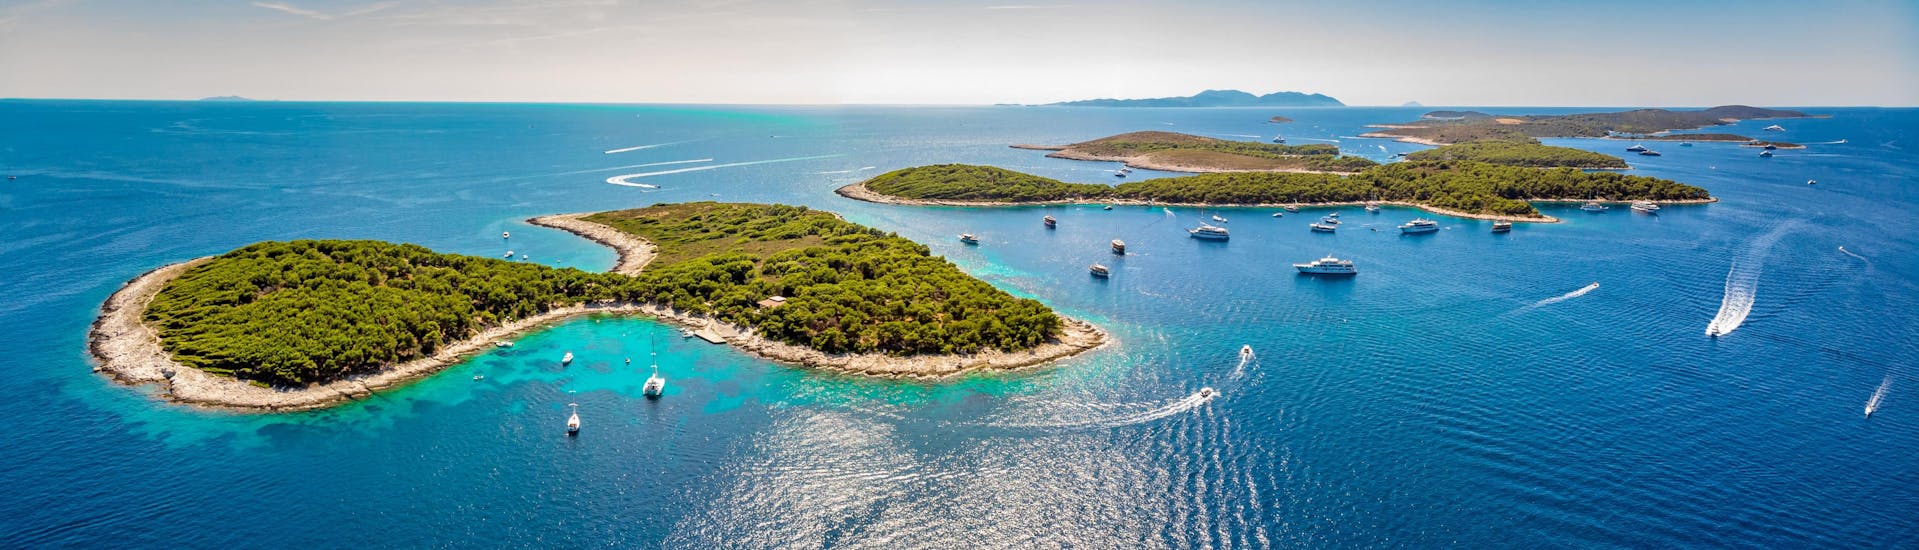 Boat trips from Hvar Island are very popular.